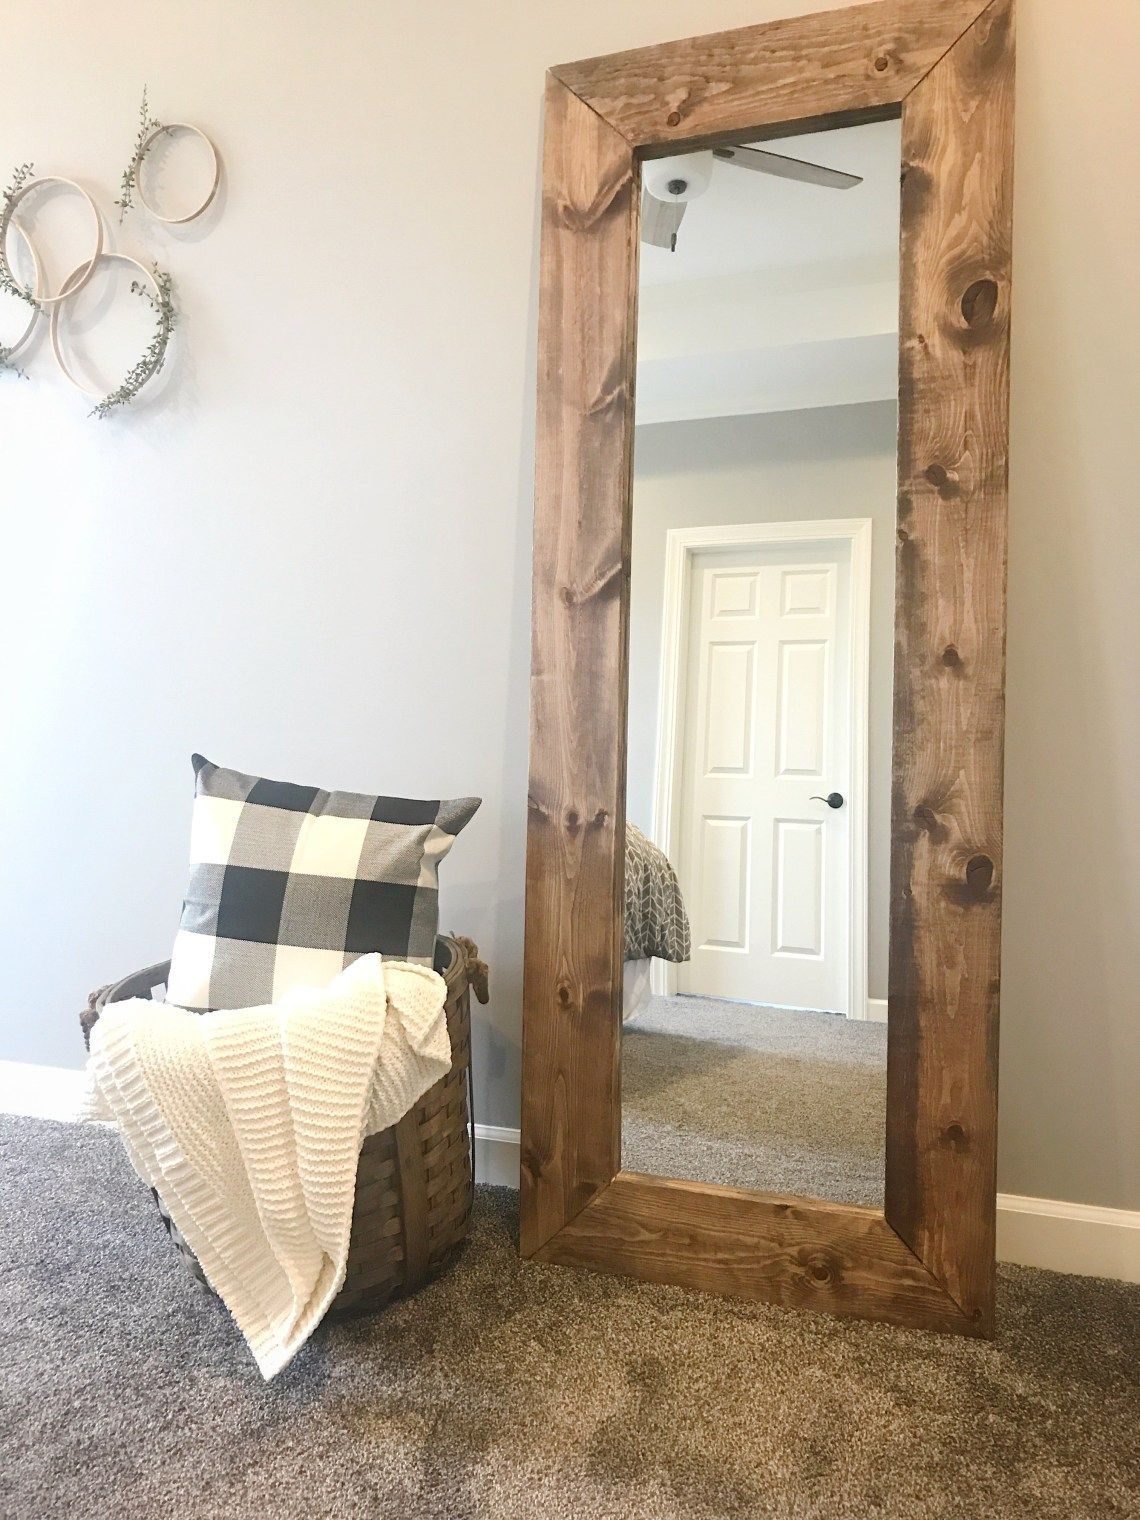 How to Build a DIY Wood Mirror Frame - The Holtz House - How to Build a DIY Wood Mirror Frame - The Holtz House -   17 diy Wood rustic ideas